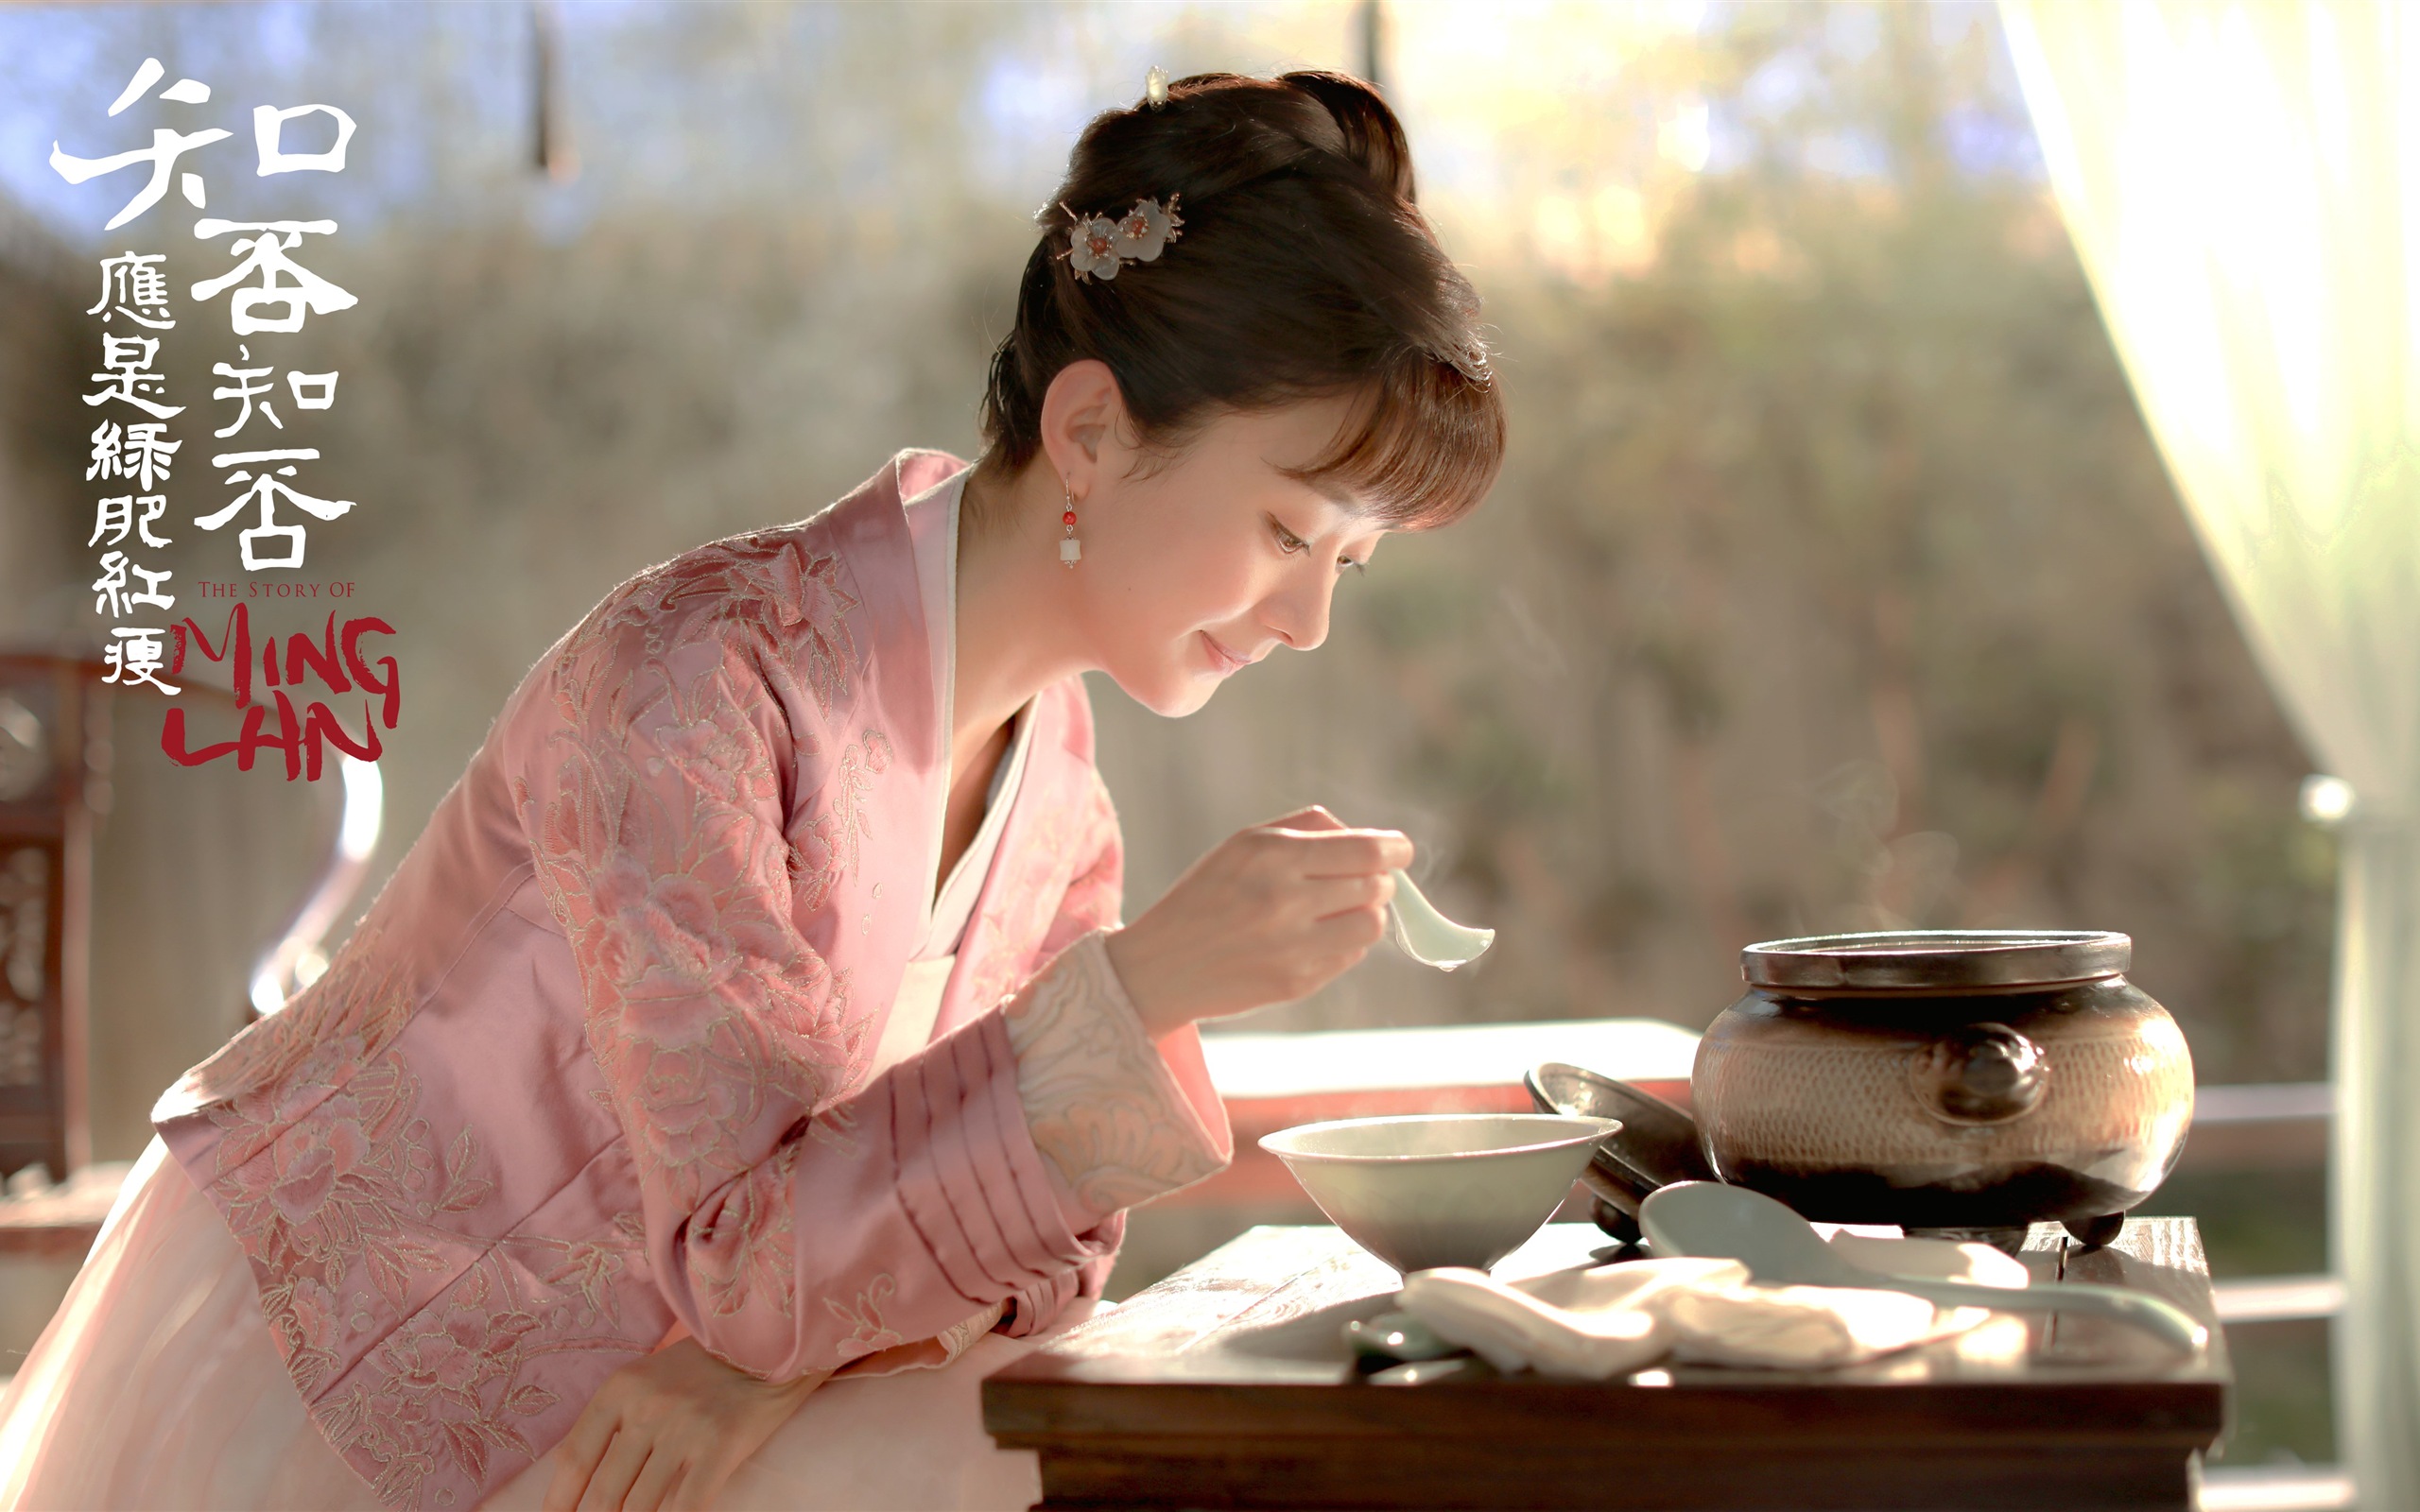 The Story Of MingLan, TV series HD wallpapers #29 - 2560x1600